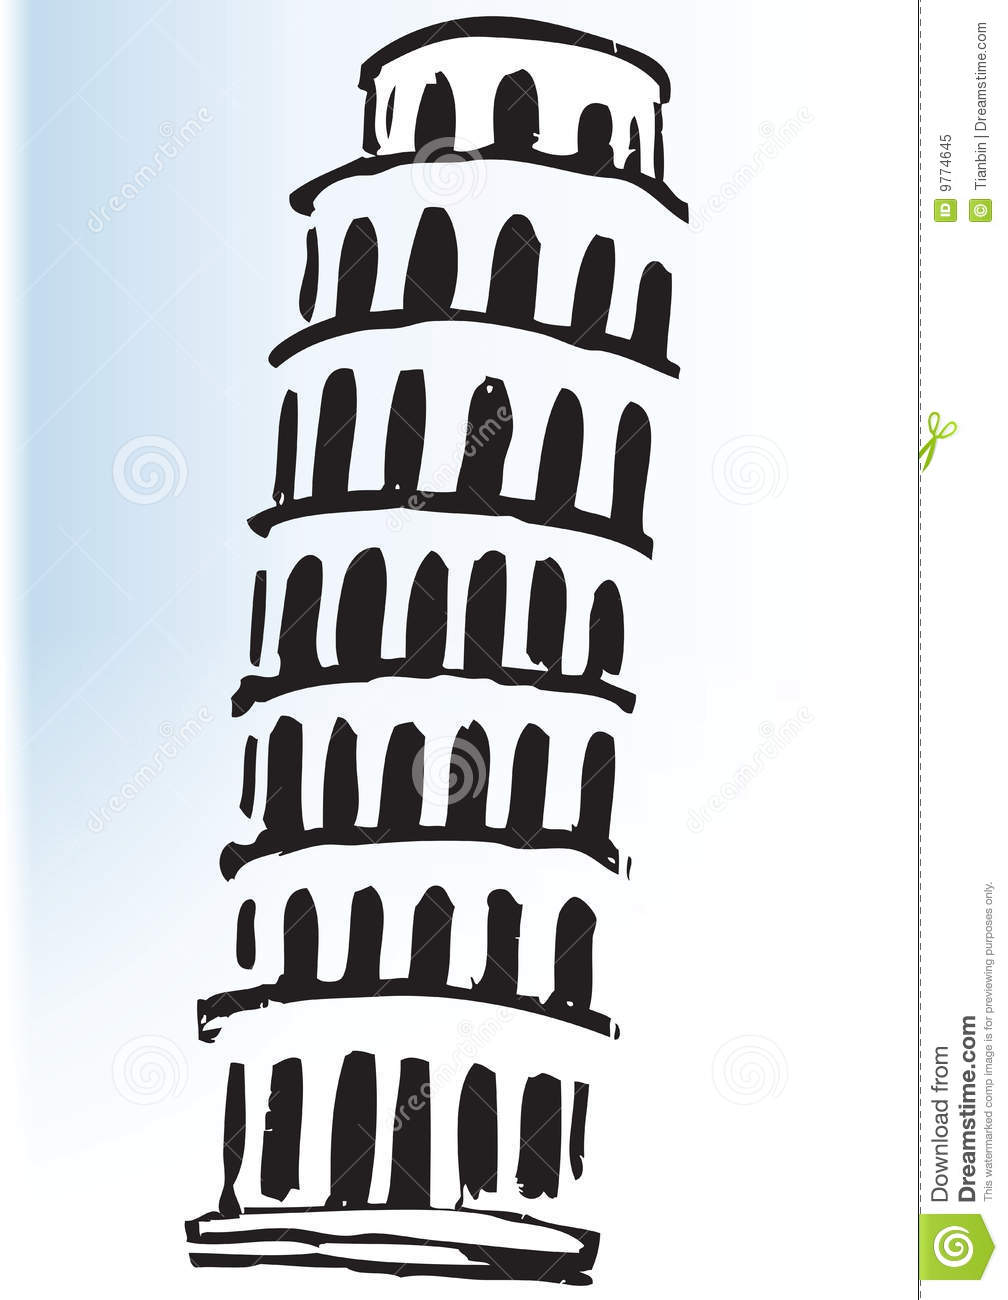 Leaning Tower Of Pisa Art Royalty Free Stock Photo   Image  9774645